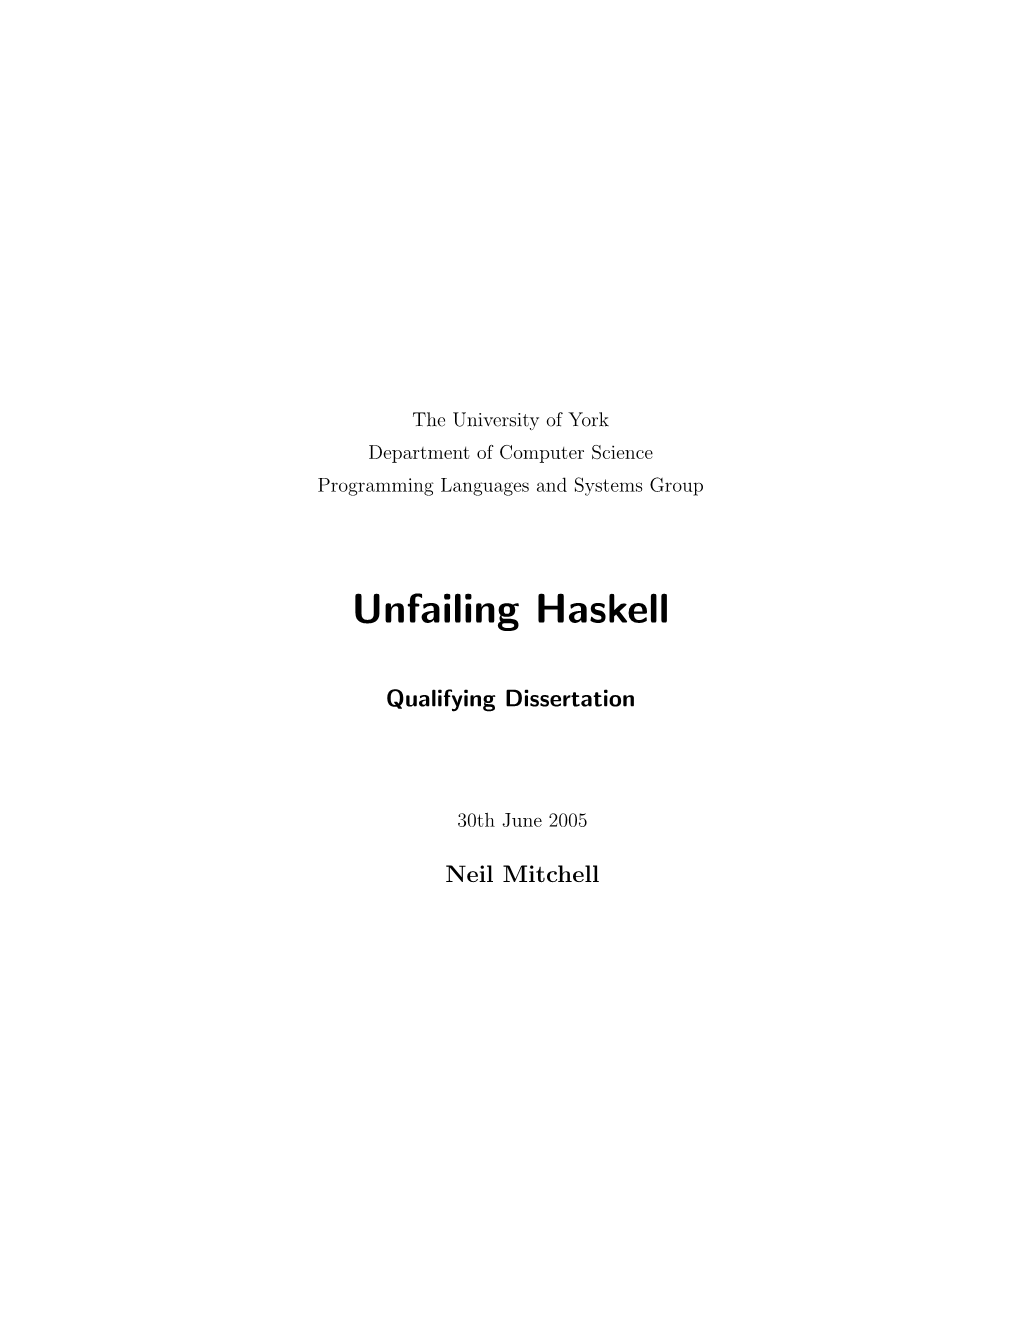 Unfailing Haskell